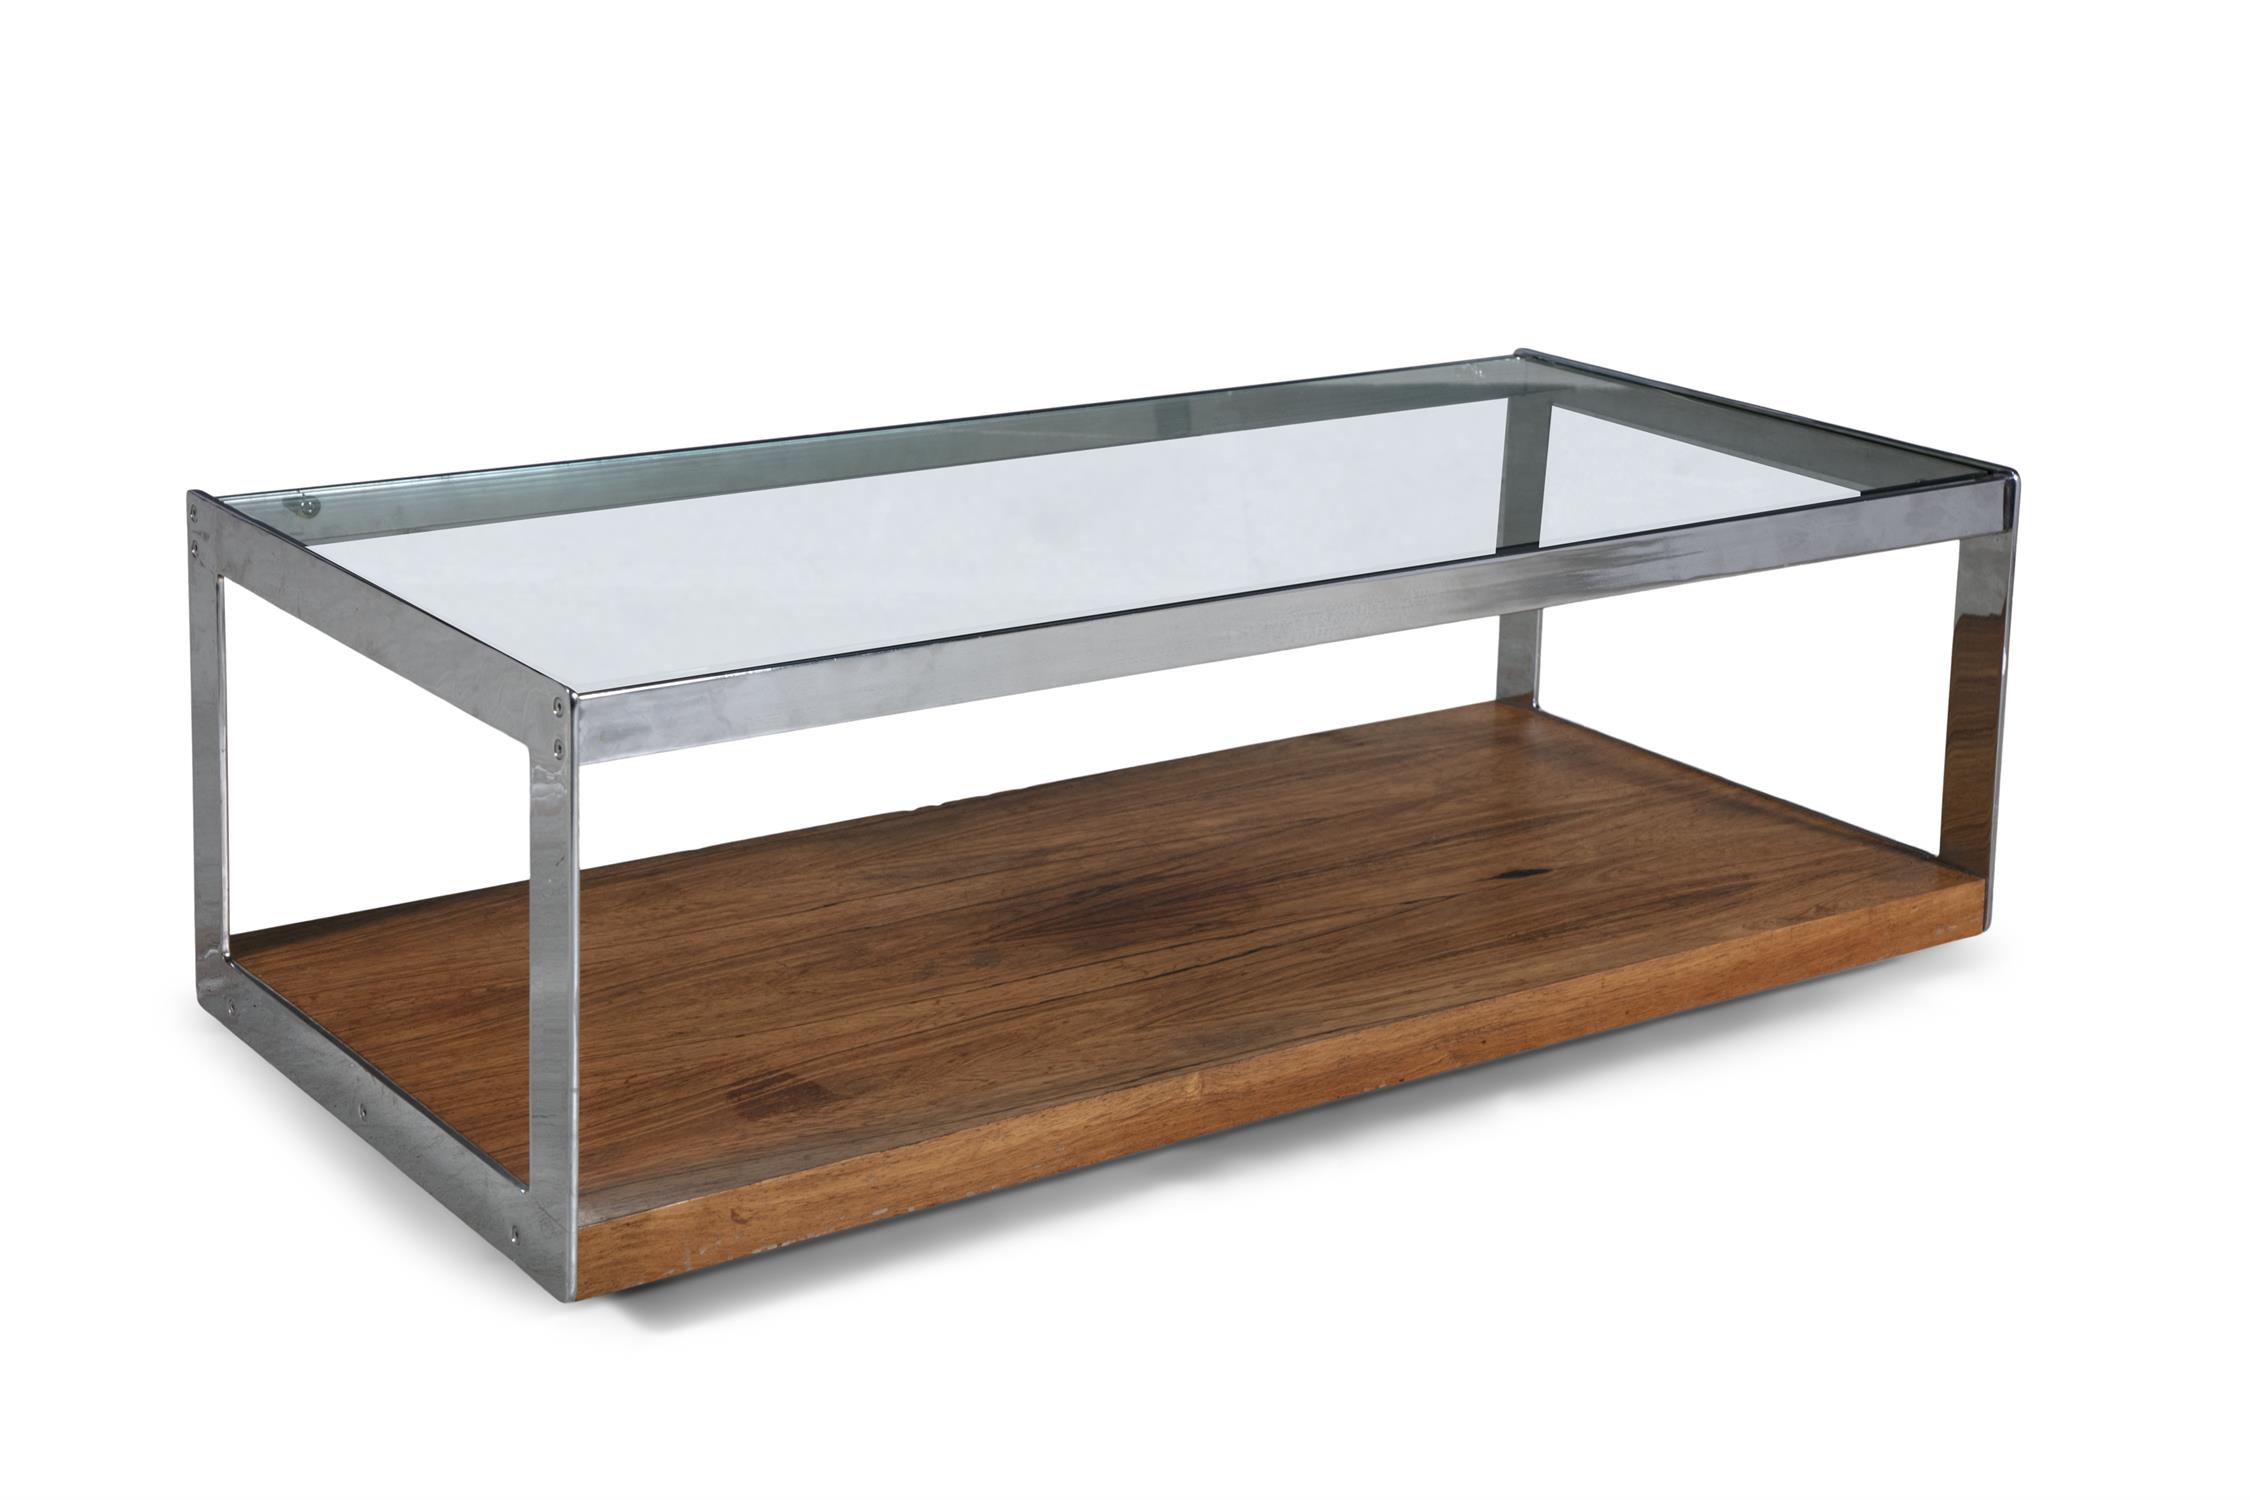 MERROW & ASSOCIATES A rosewood and chrome coffee table by Merrow and Associates, with a glass top, - Image 2 of 4